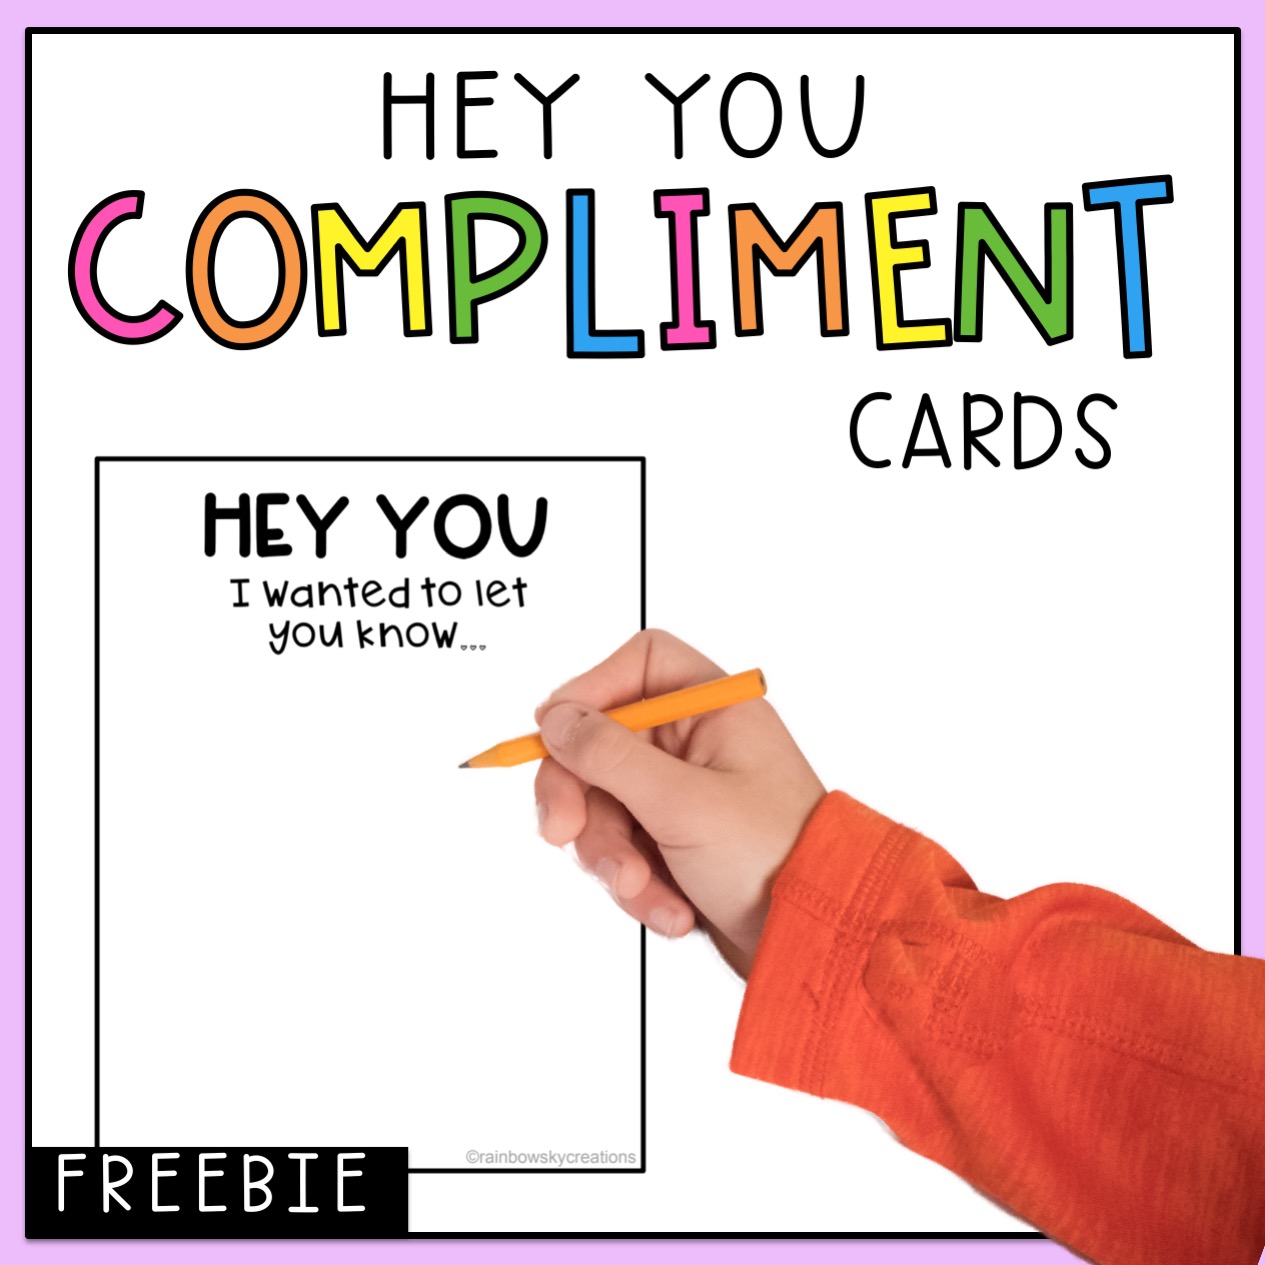 Hey You Compliment